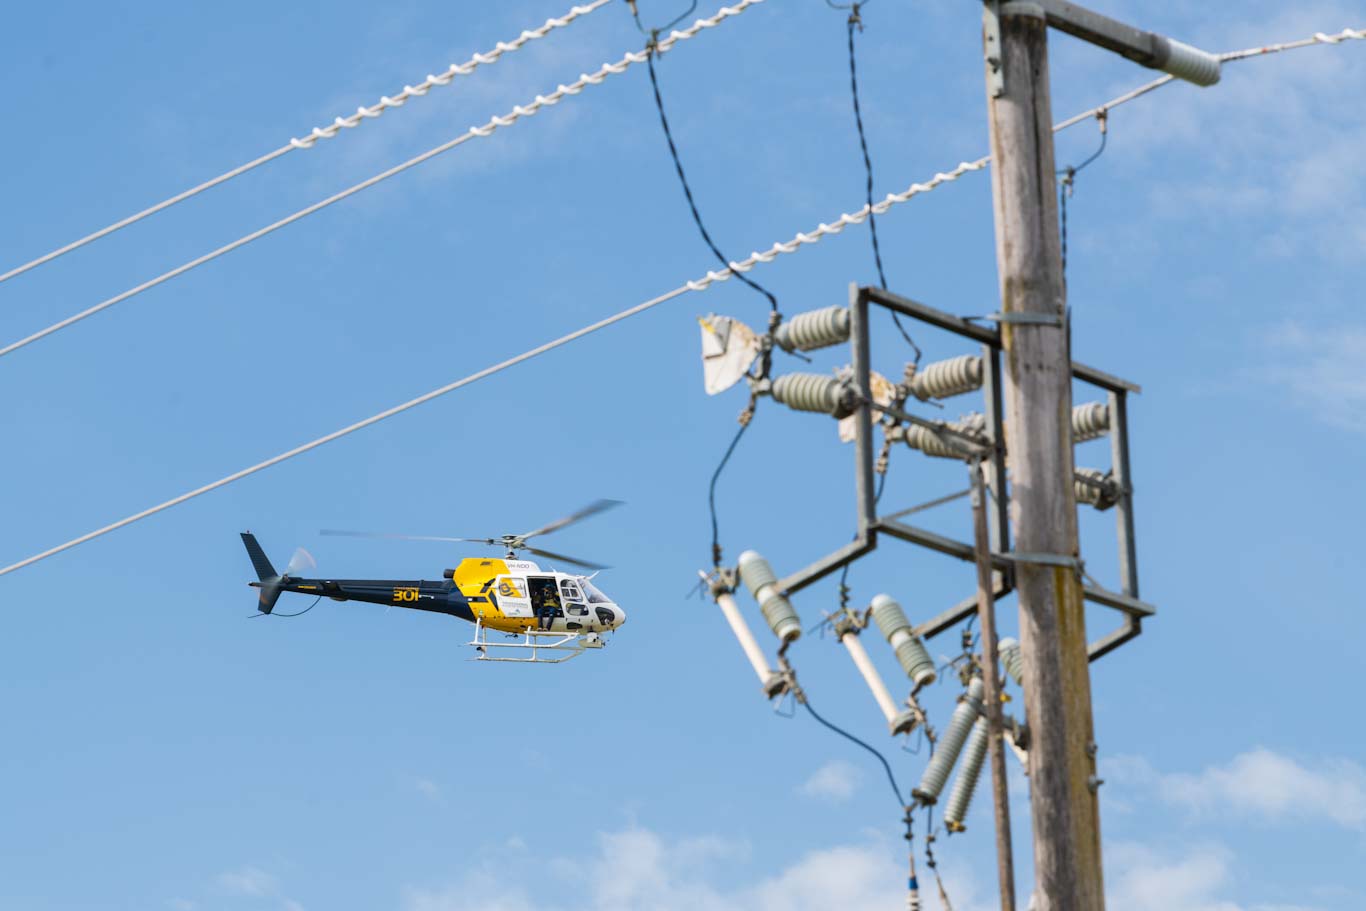 Helicopter flying past a power pole